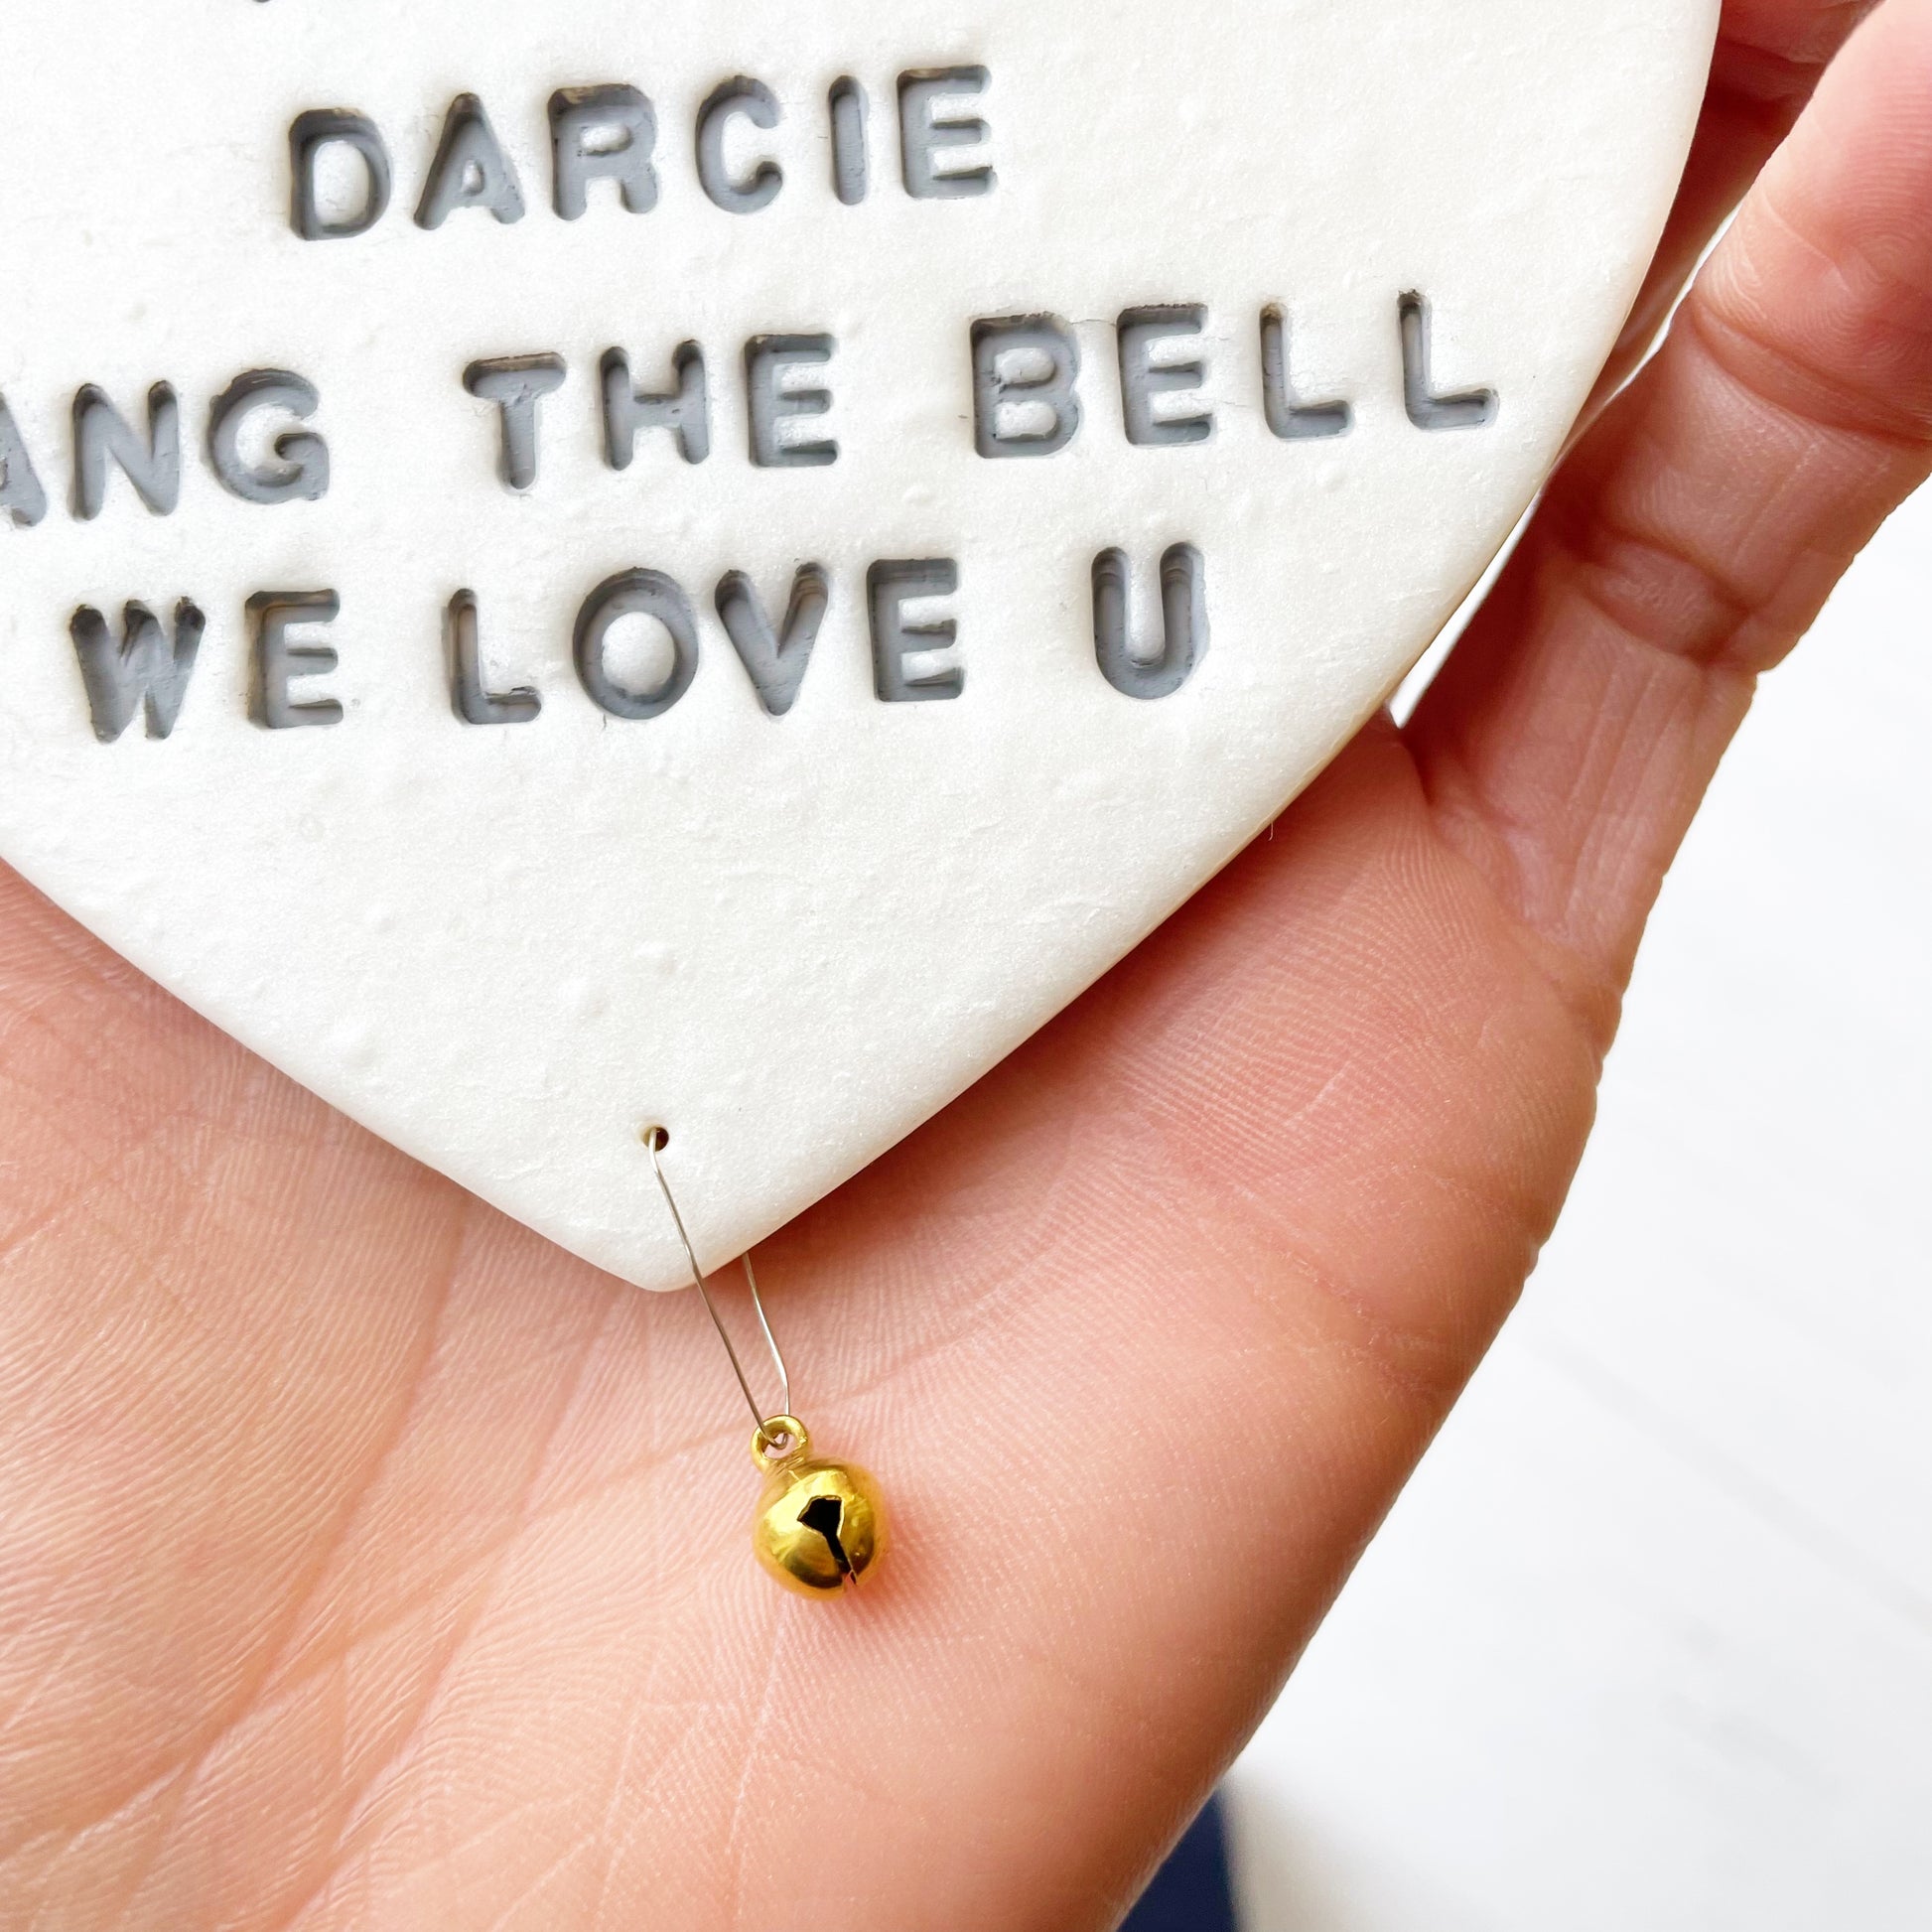 Personalised cancer survivor gift, pearlised white clay hanging heart with a grey lace edge at the top of the heart and a gold bell hanging below, the heart is personalised with 10-01-24 DARCIE RANG THE BELL WE LOVE U